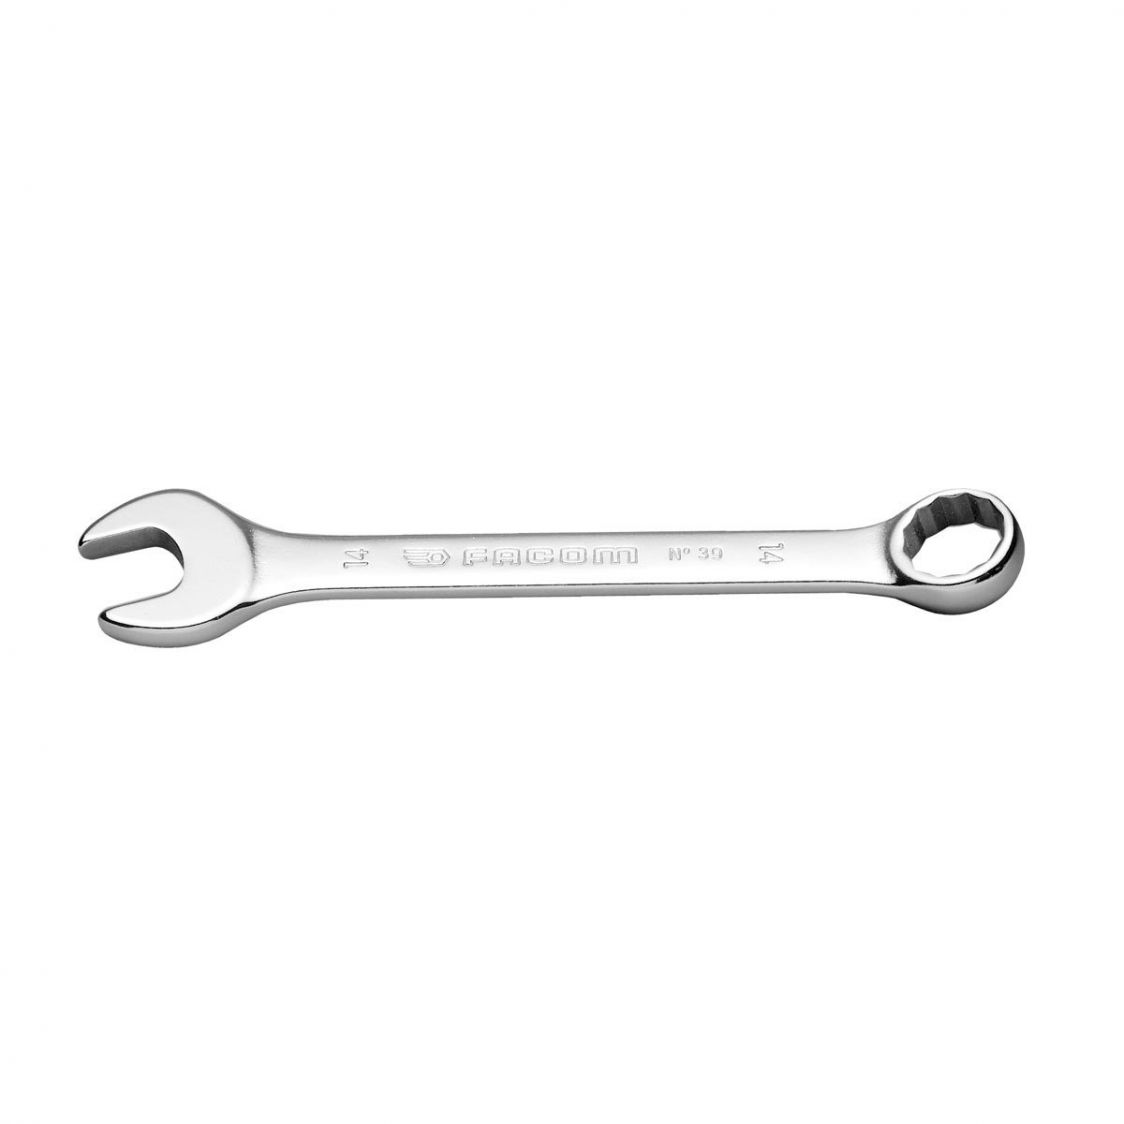 FACOM 39.17 - 17mm Metric Stubby Combination Spanner